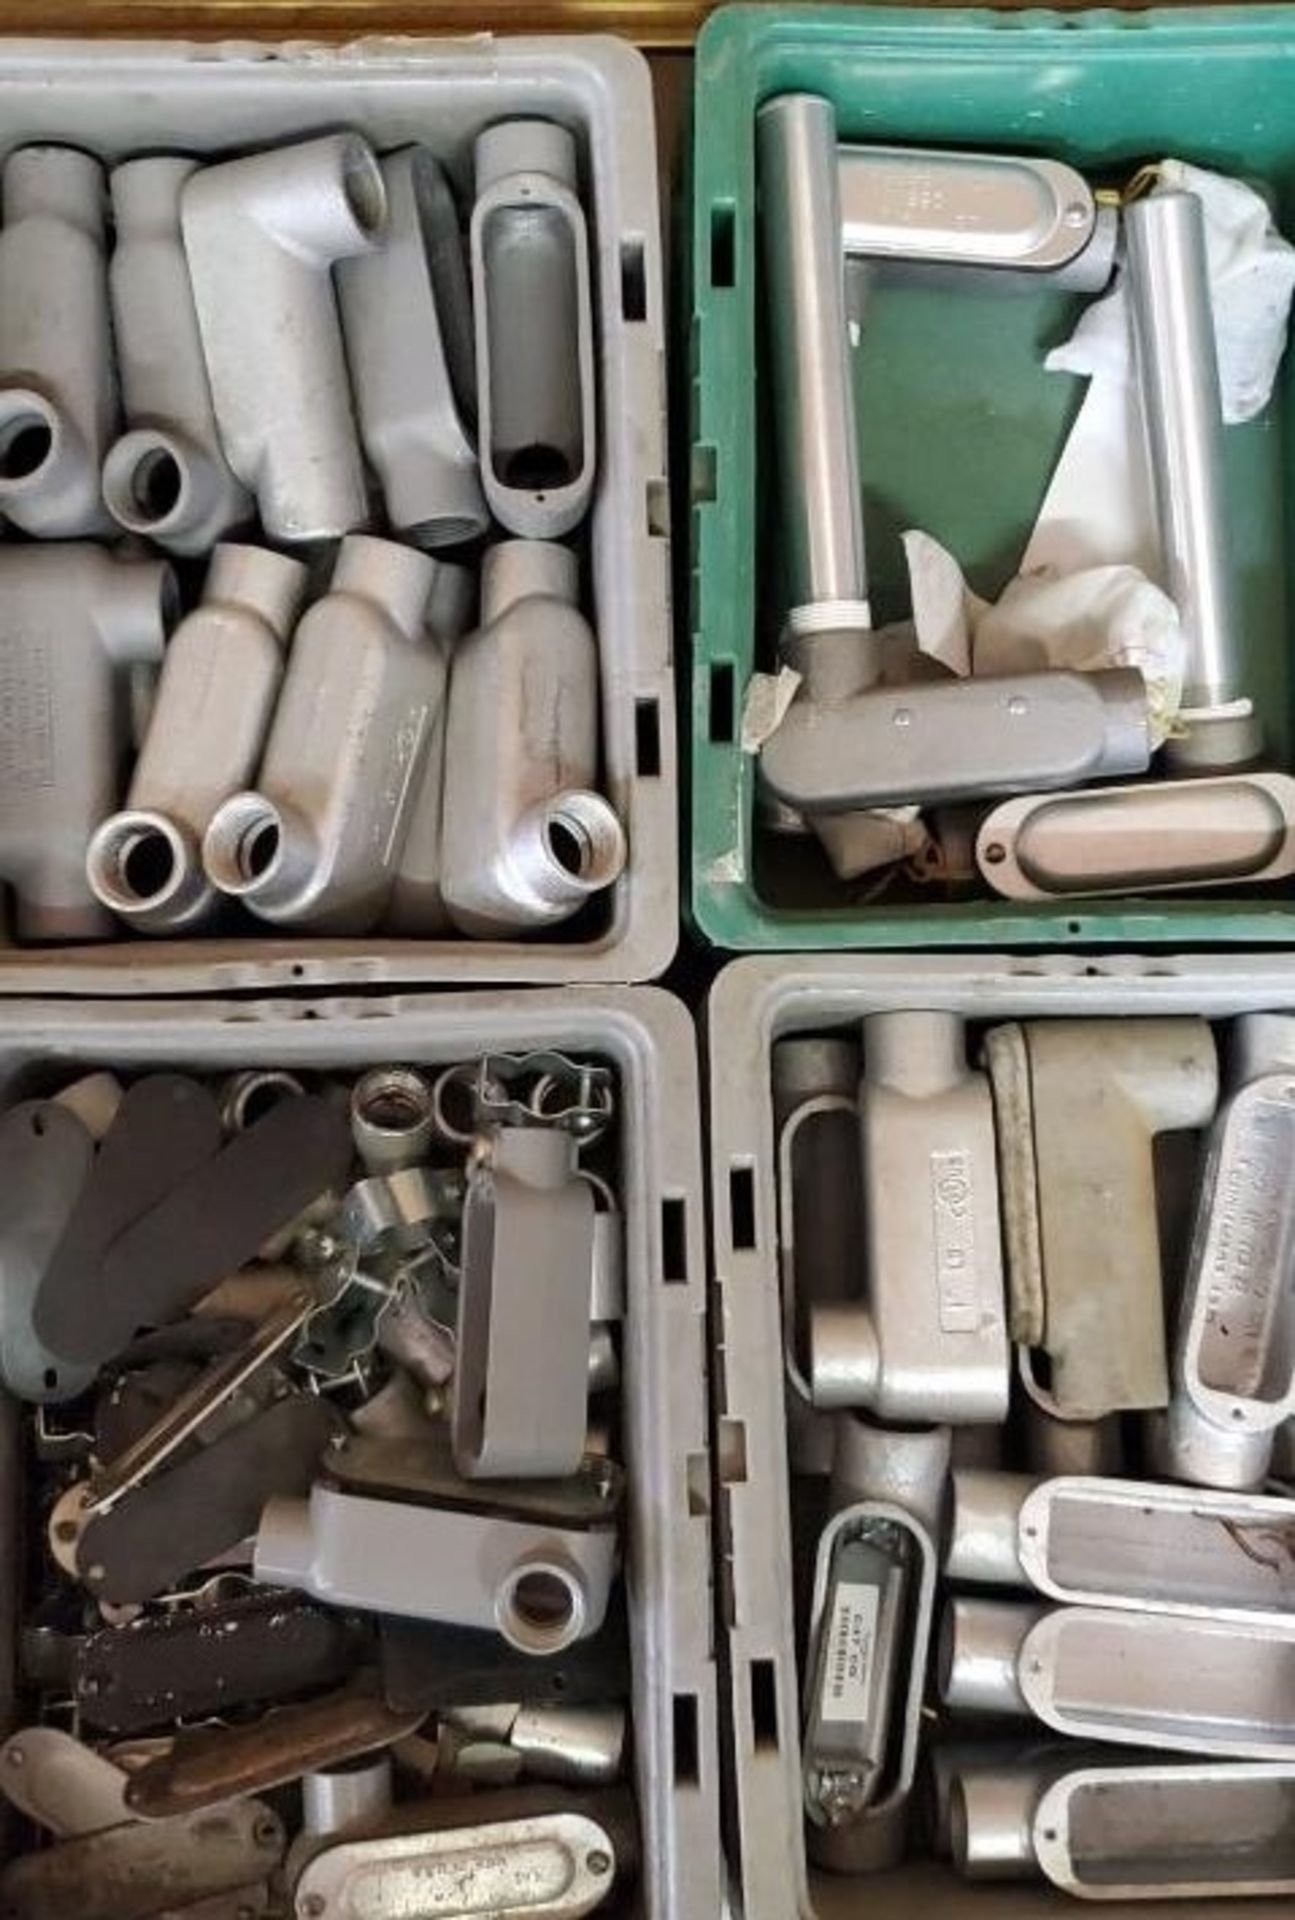 (4) Trays of Conduit Bodies, Clamps, & Covers